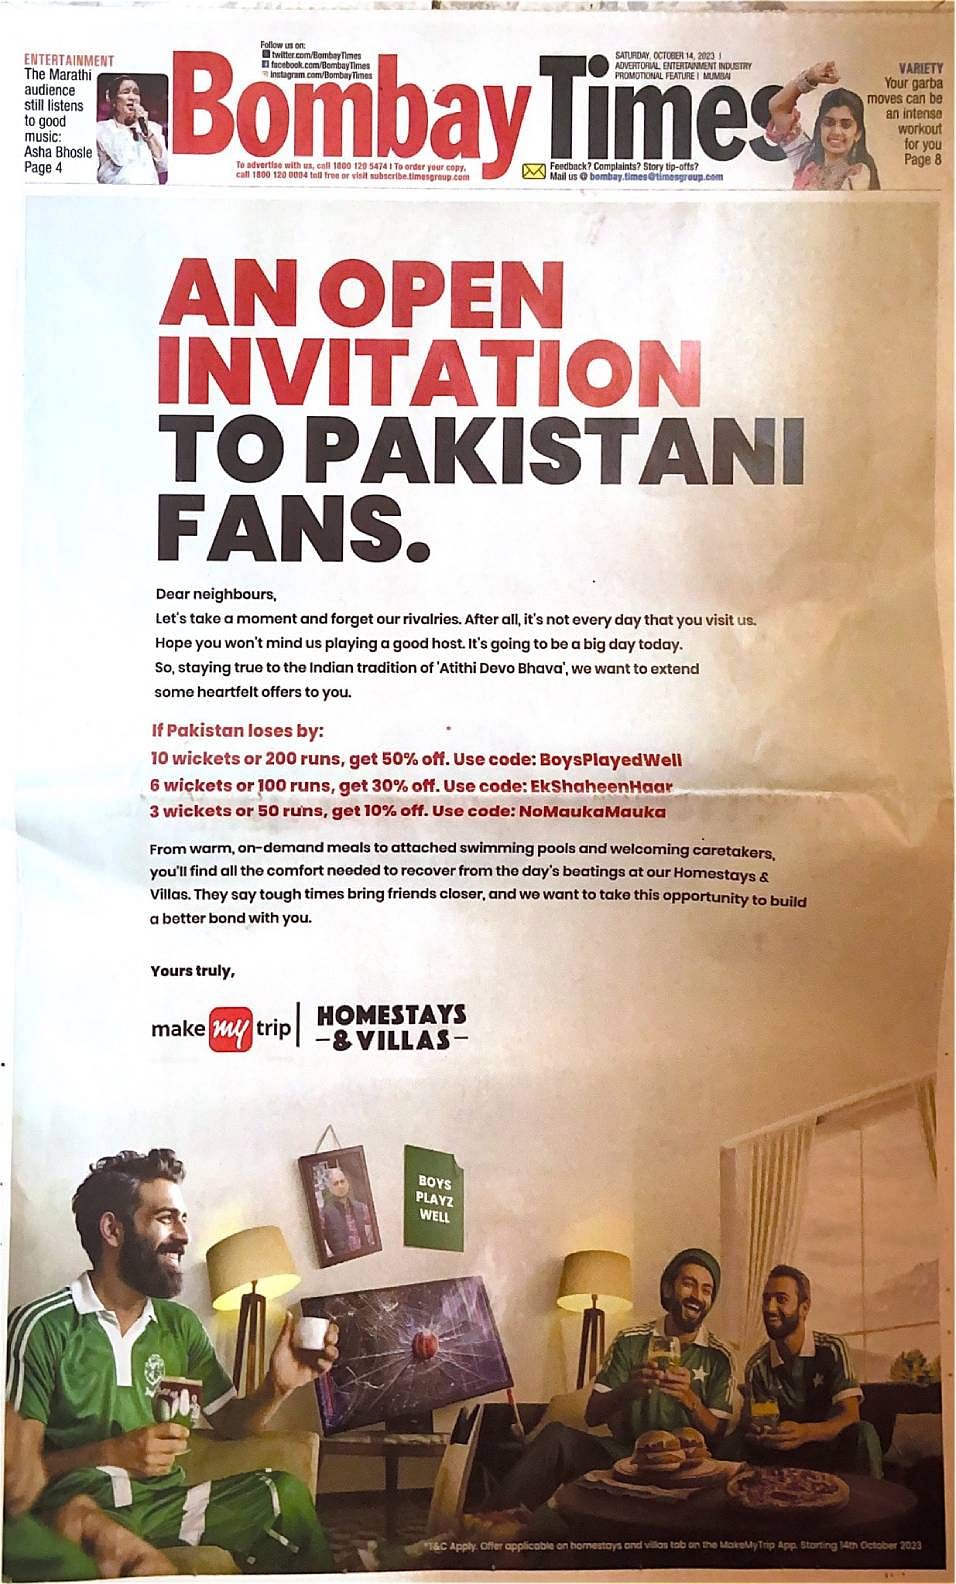 Cleartrip takes aim at MakeMyTrip following the latter's divisive print ad for India vs Pakistan